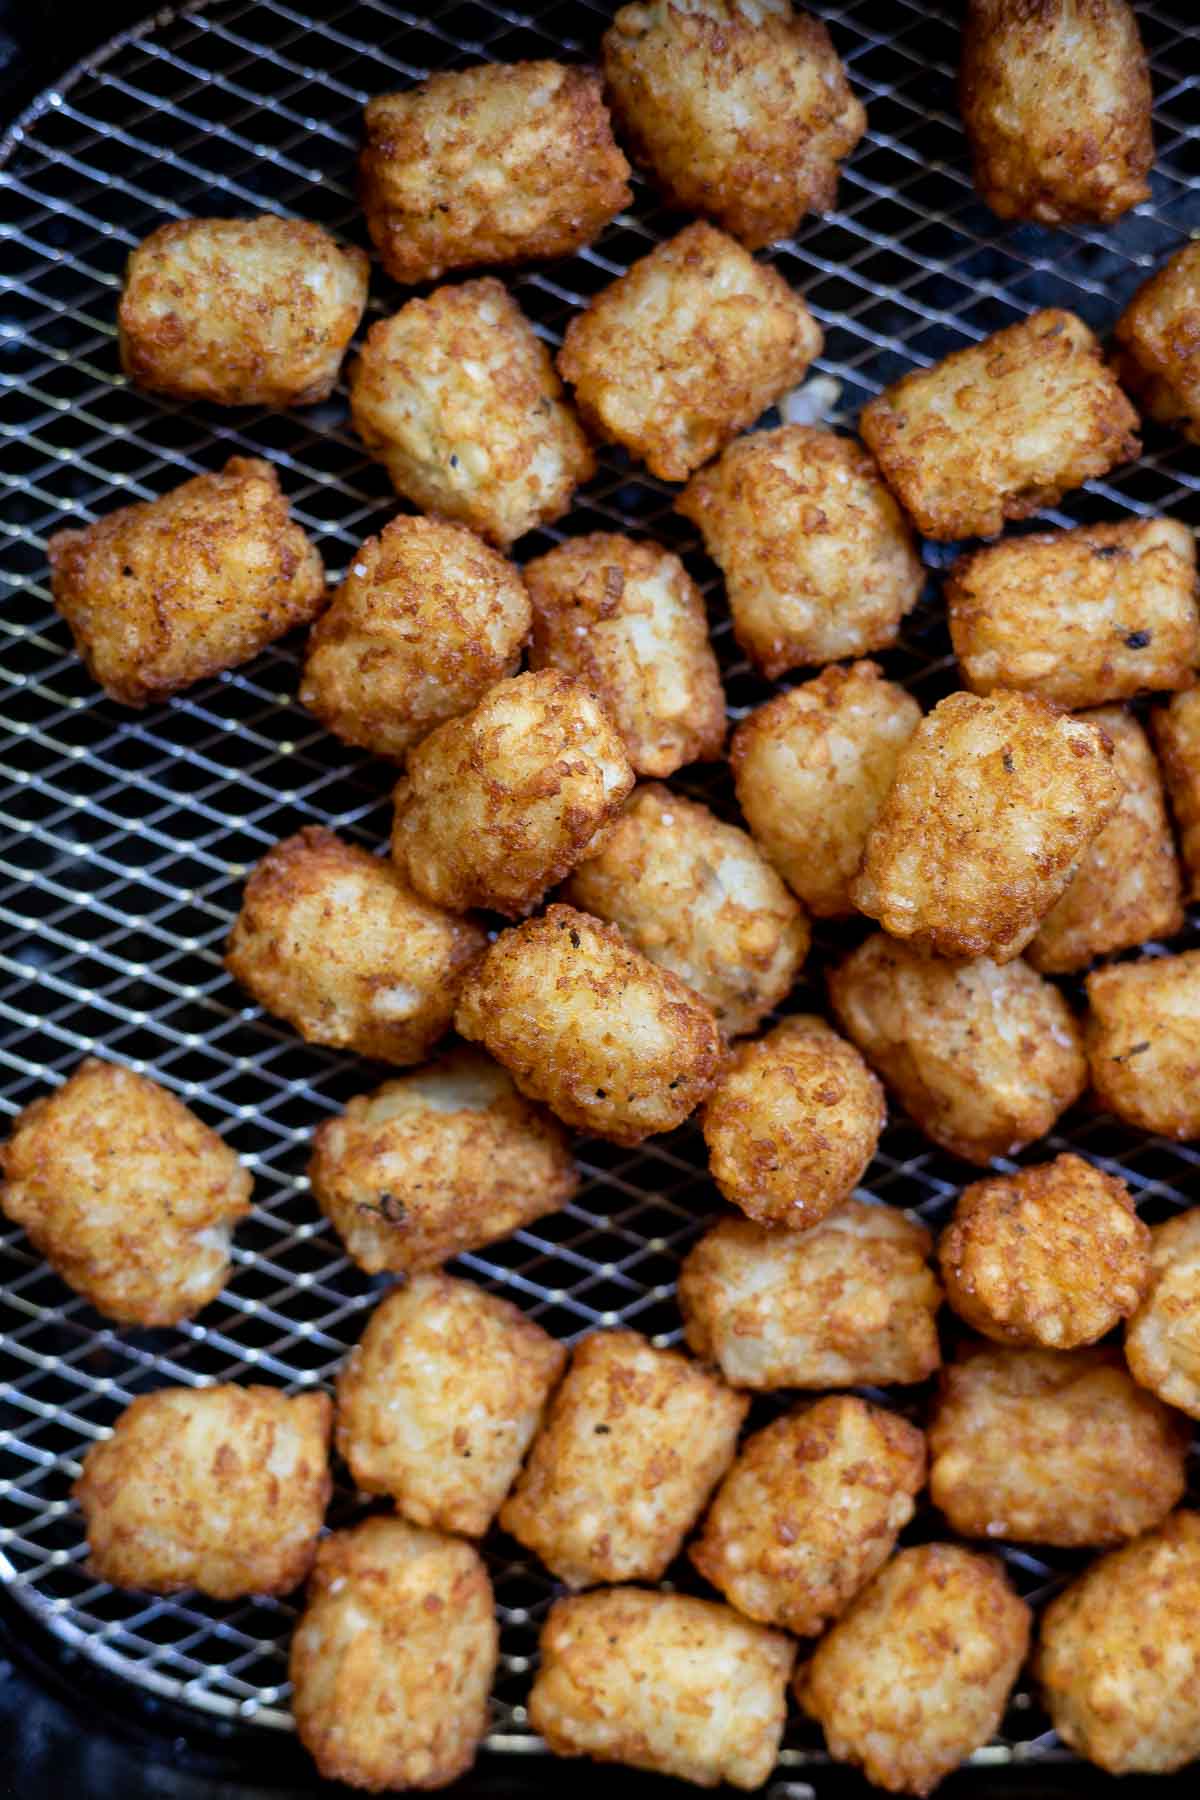 golden brown cooked tater tots in air fryer basket